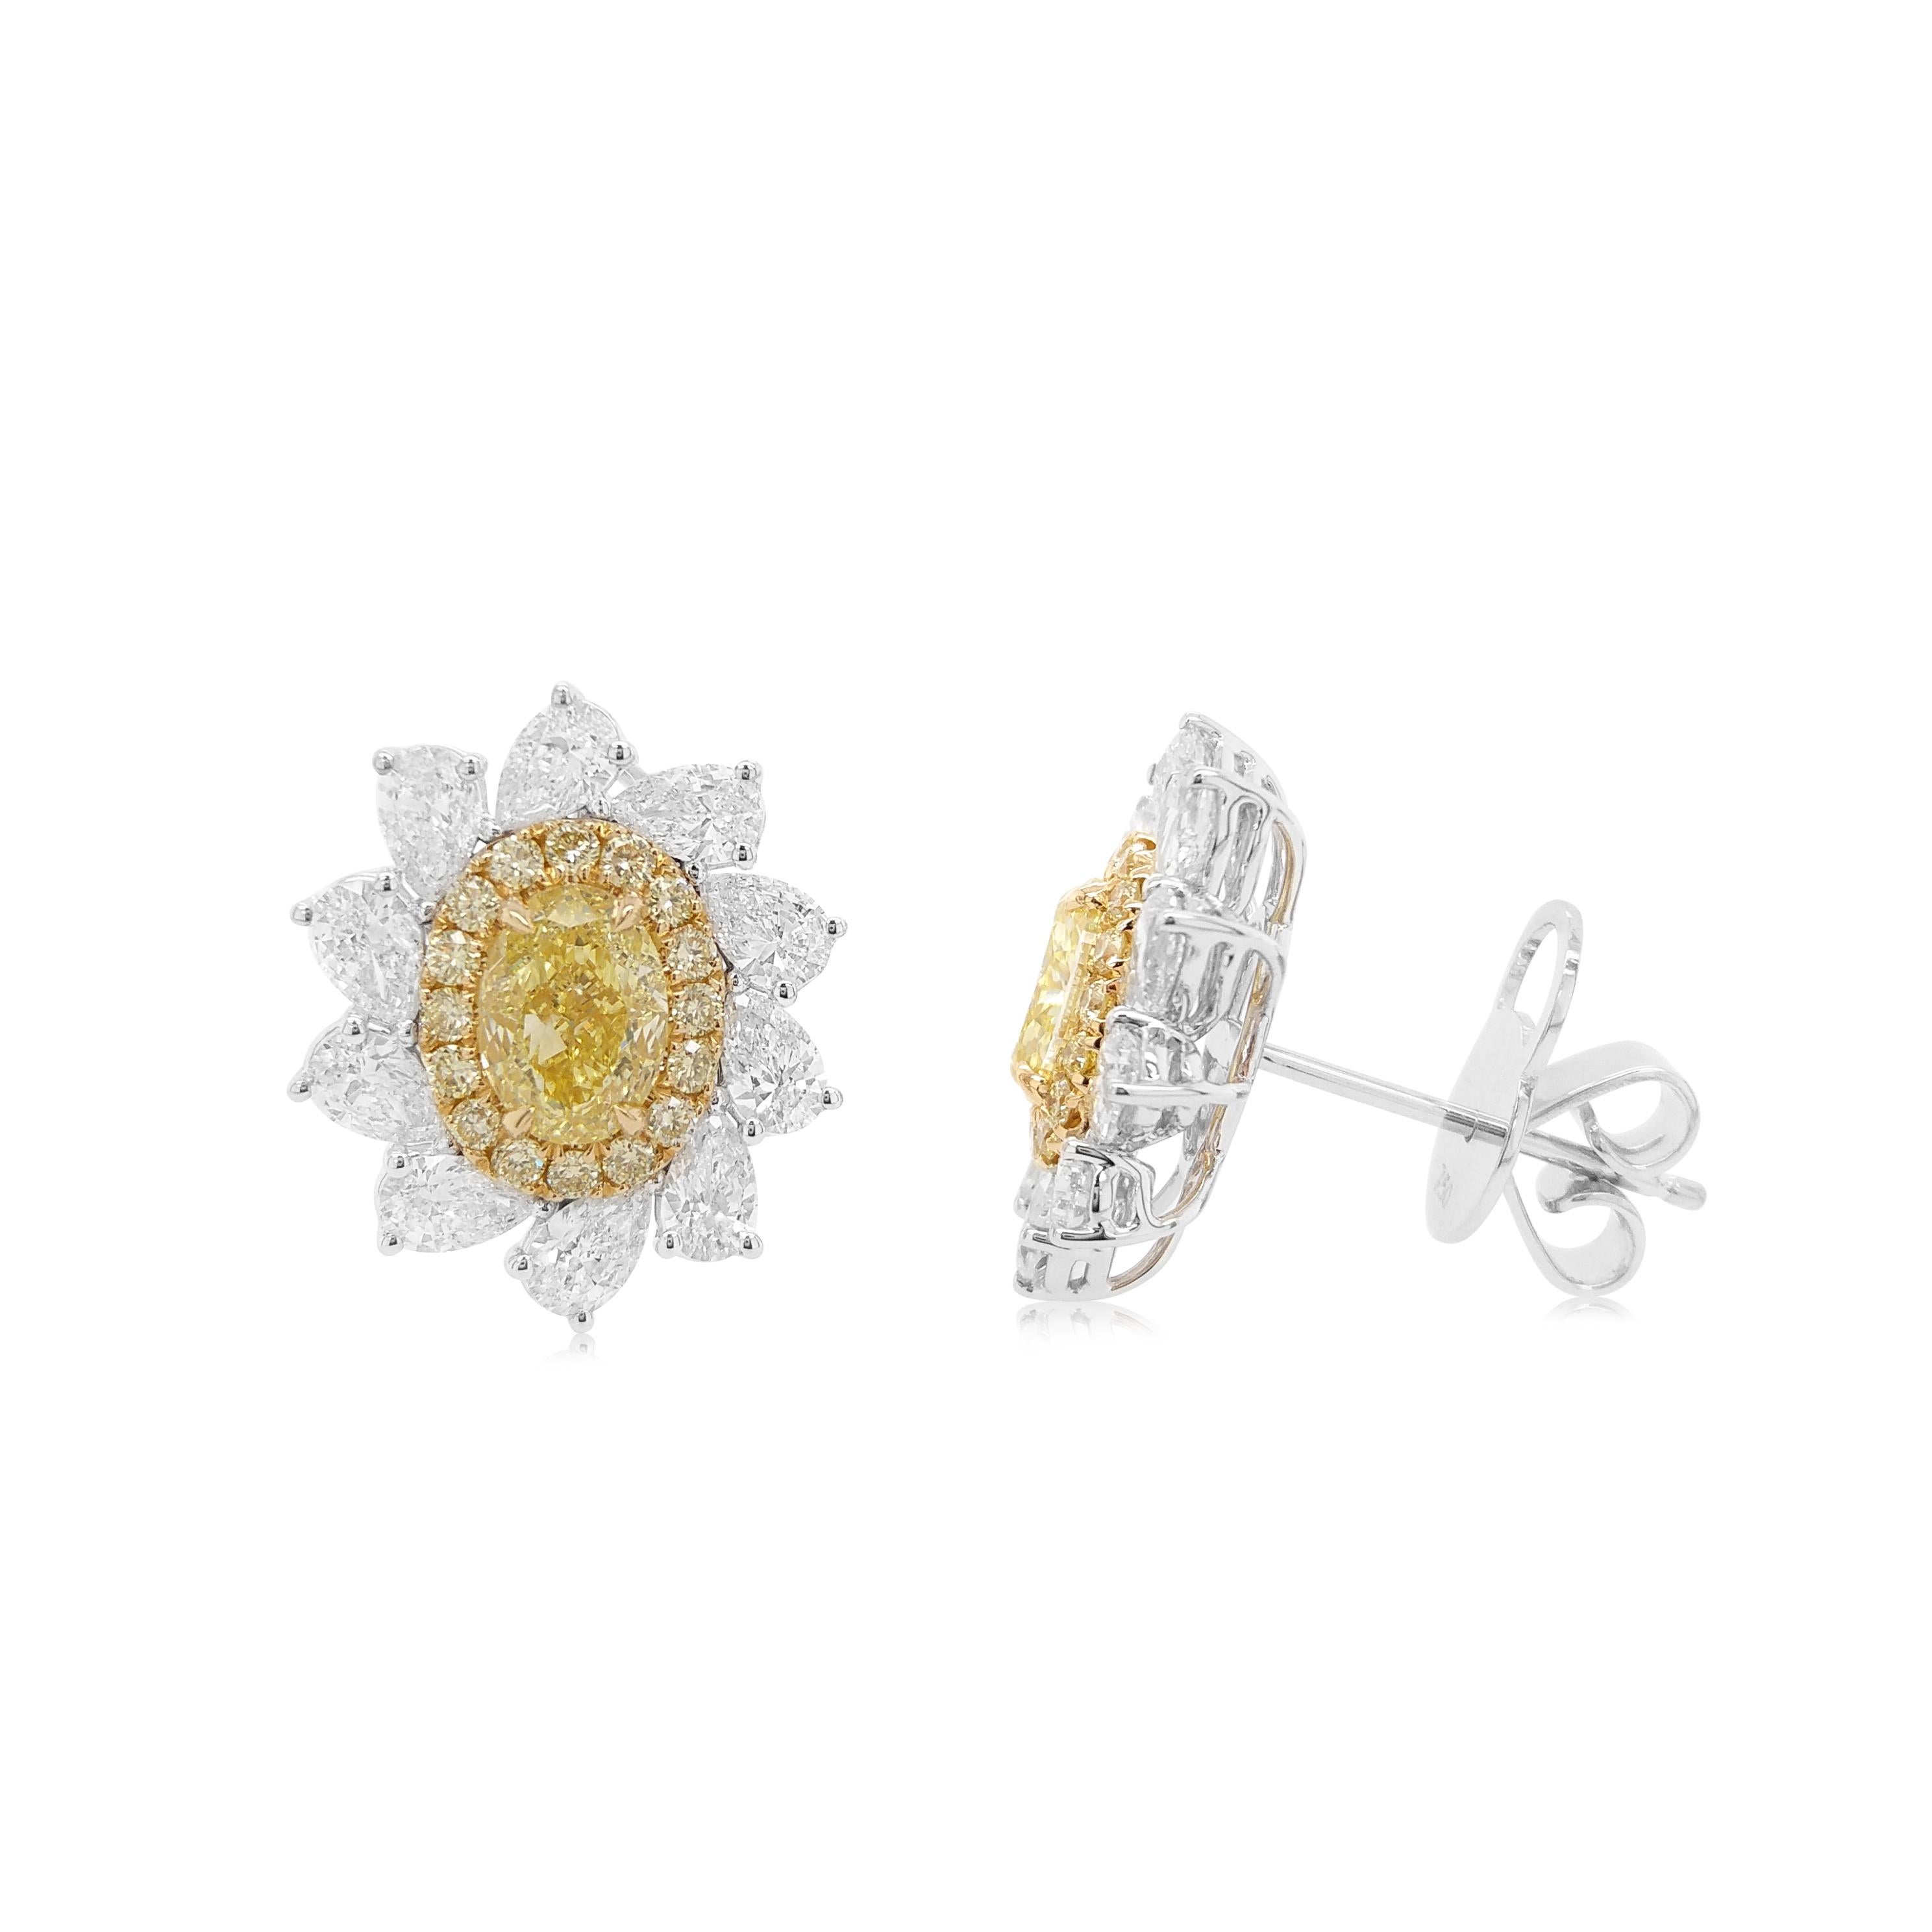 These unique 18K gold earrings feature exceptional oval-shaped Yellow diamonds at the heart of the design. The rich colour of these diamonds is complimented perfectly by the delicate white gold, which is completed by a combination of pear-shaped